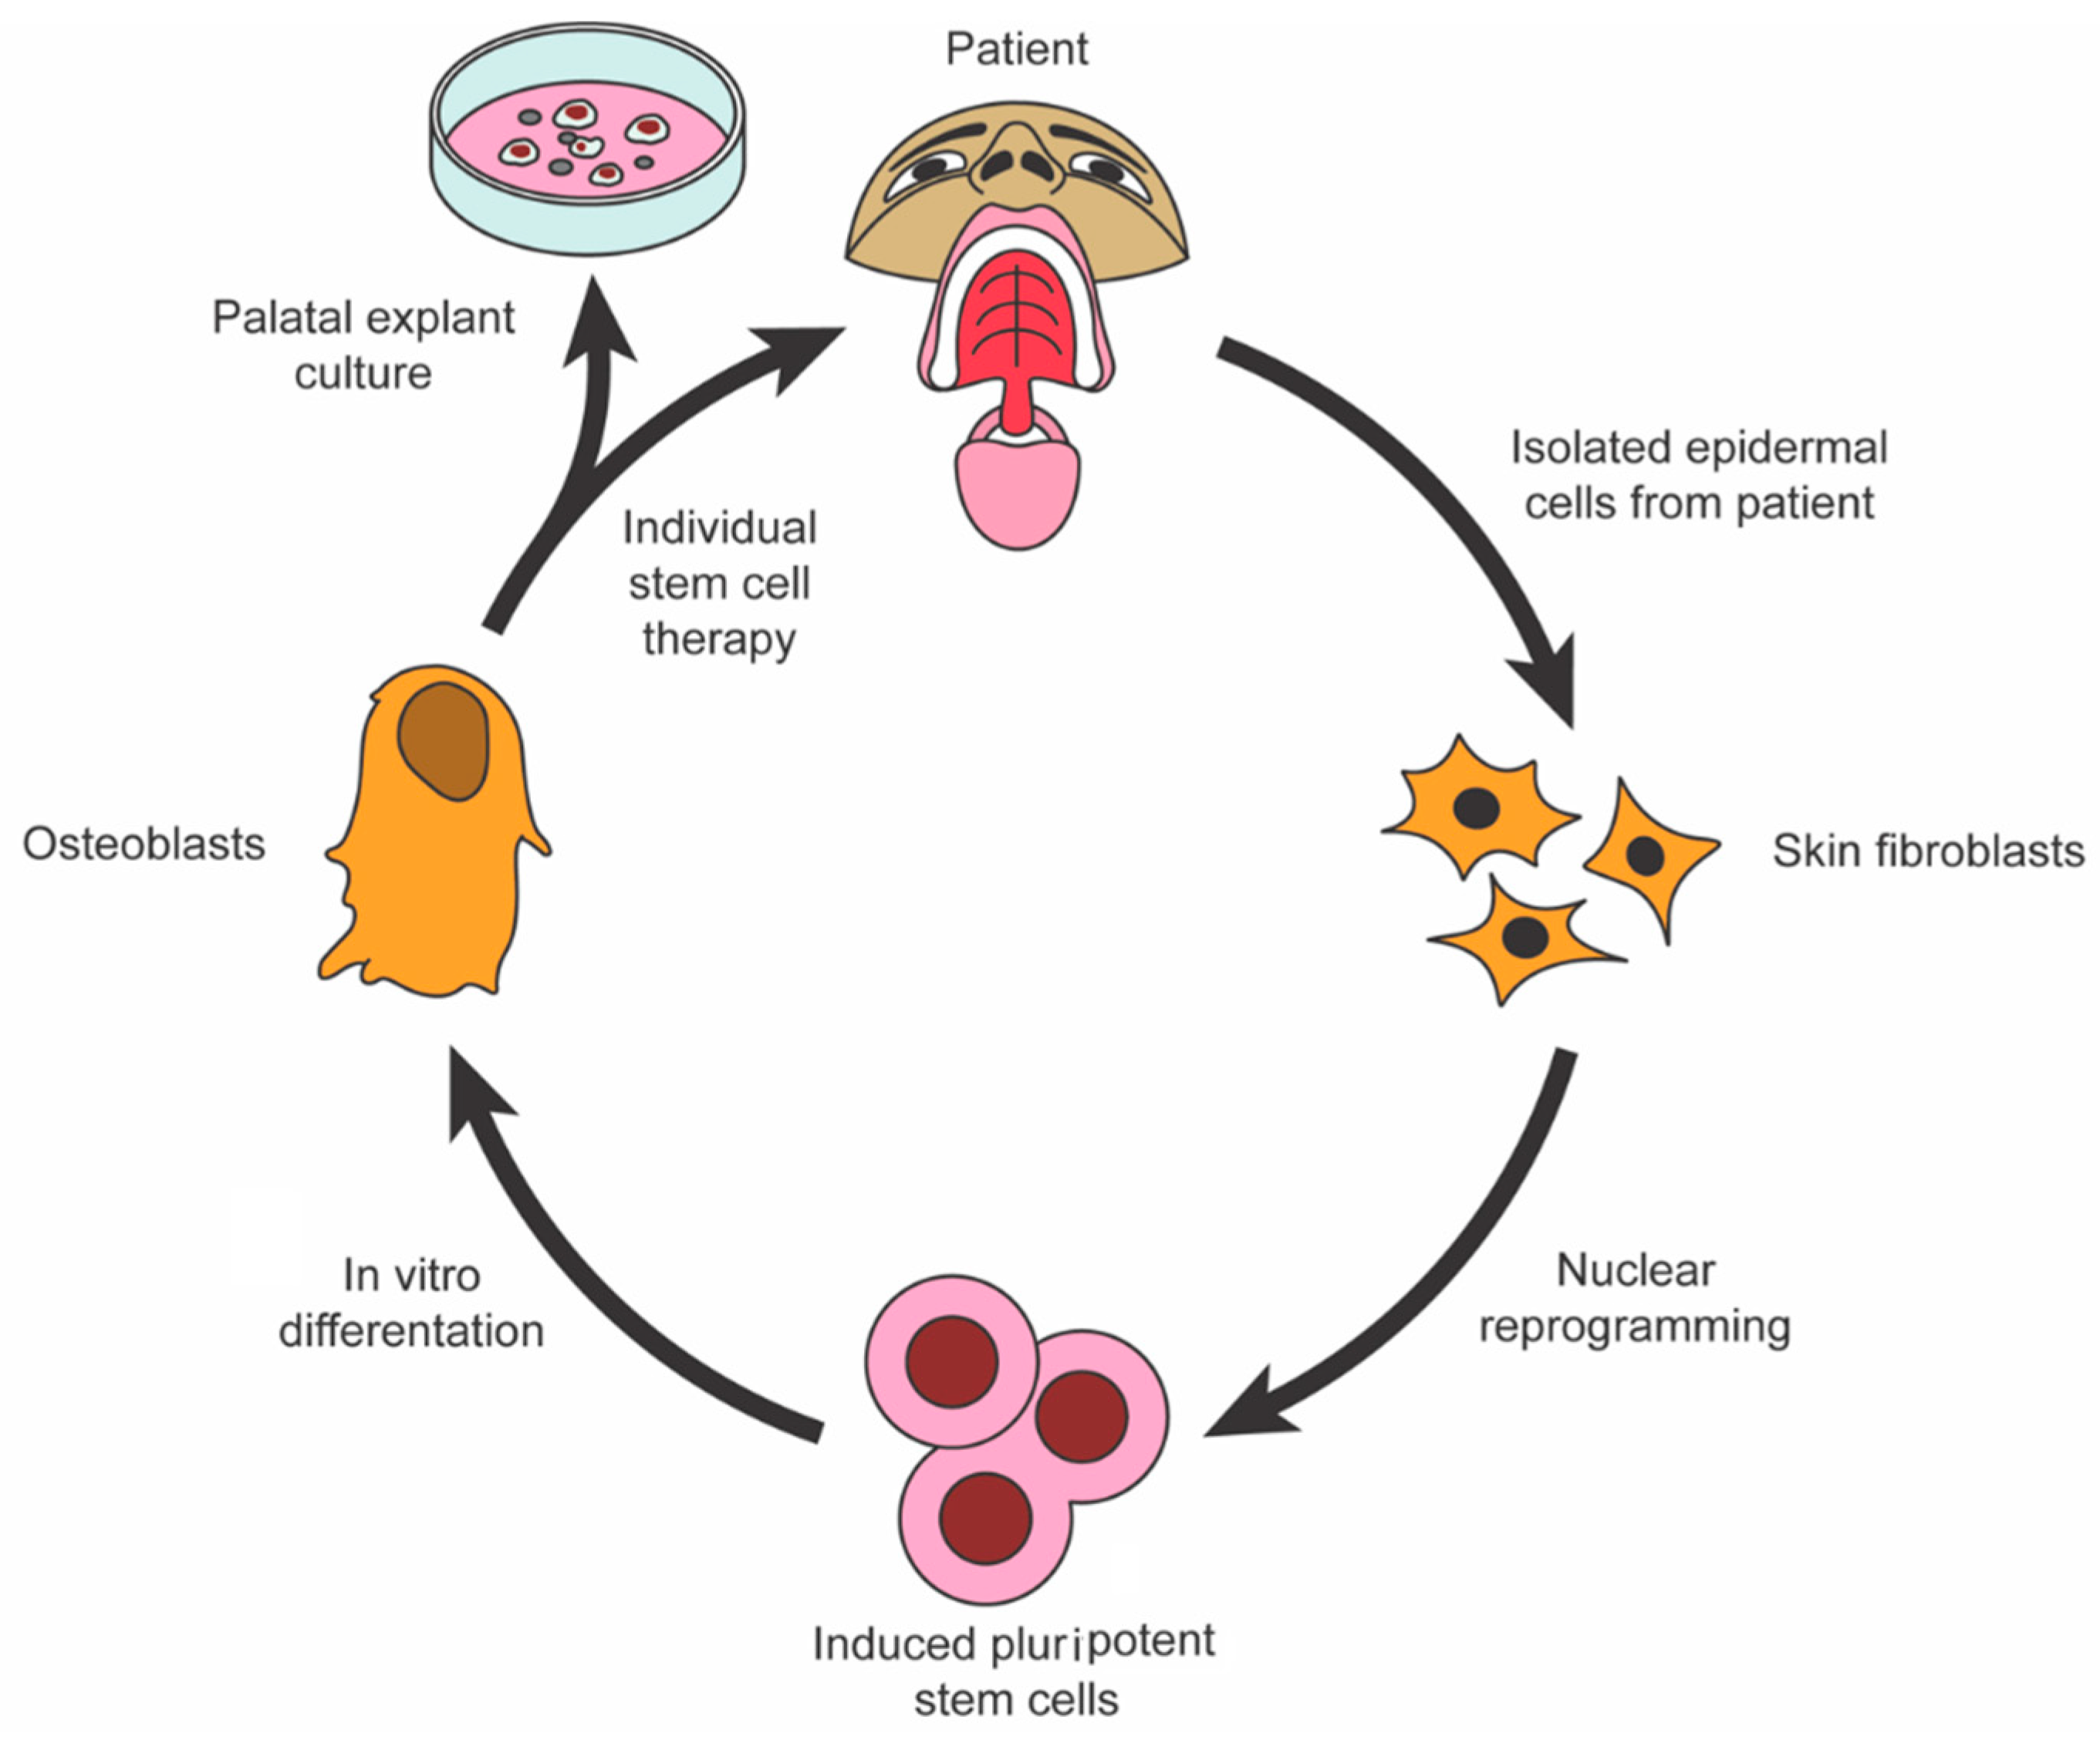 Stem Cells and Differentiation: the Core of your Body's 24/7/365  Regeneration Process, by Sam Kneller, The Explanation